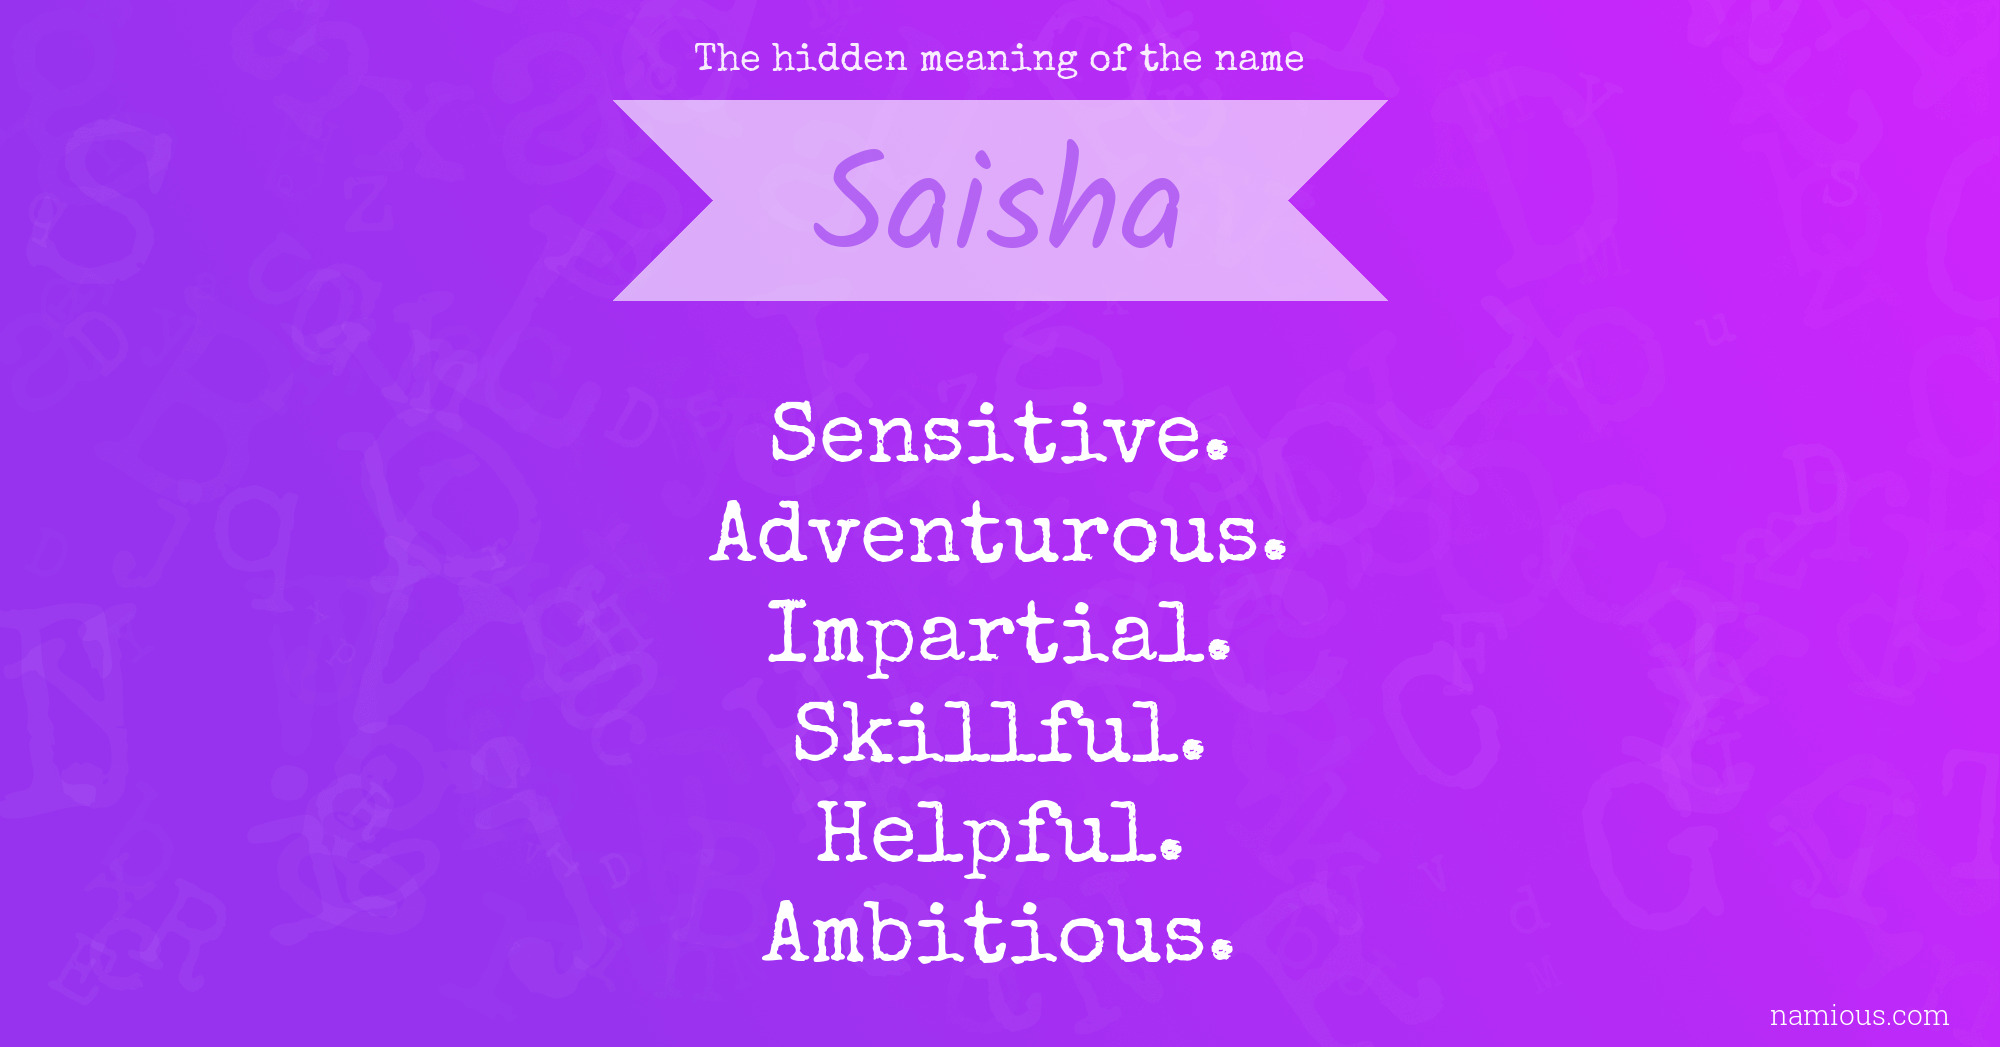 The hidden meaning of the name Saisha